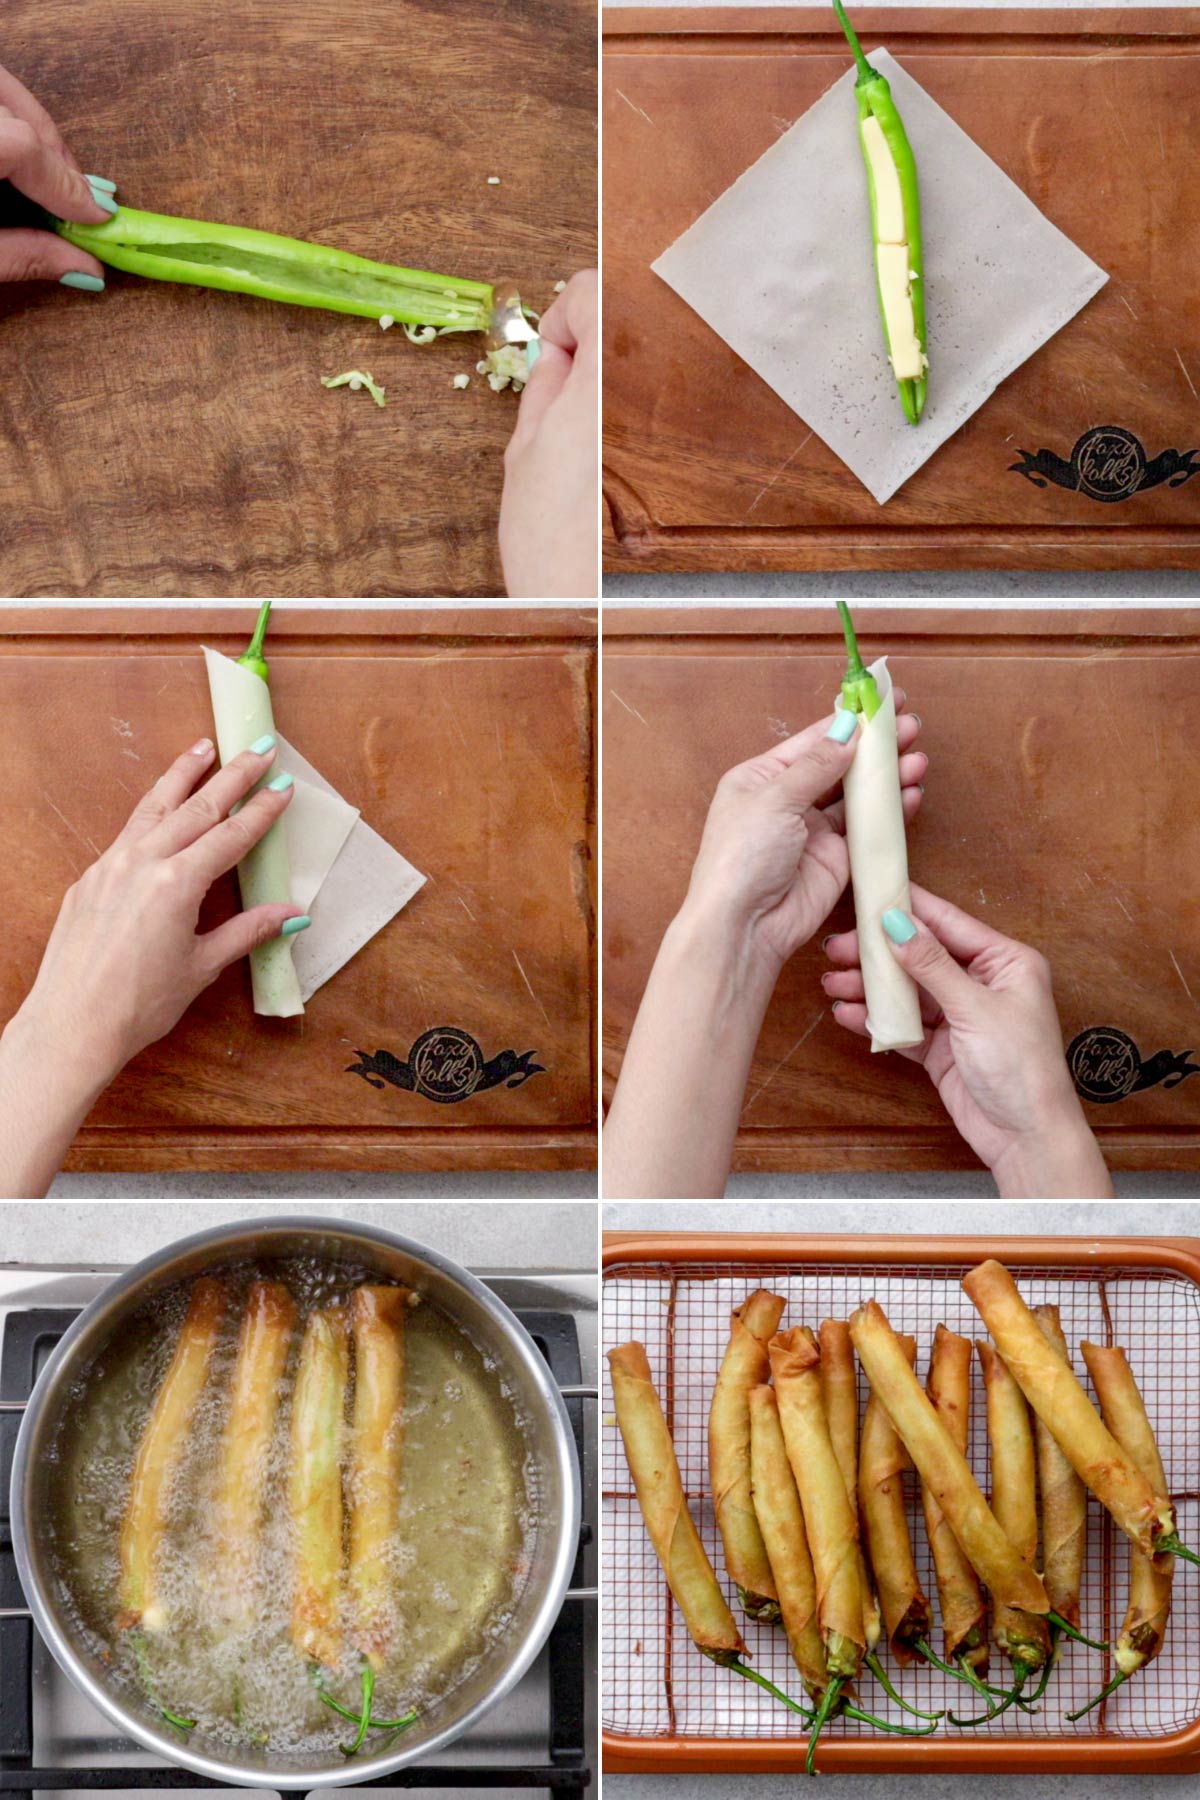 Steps on how to make Dynamite Lumpia.